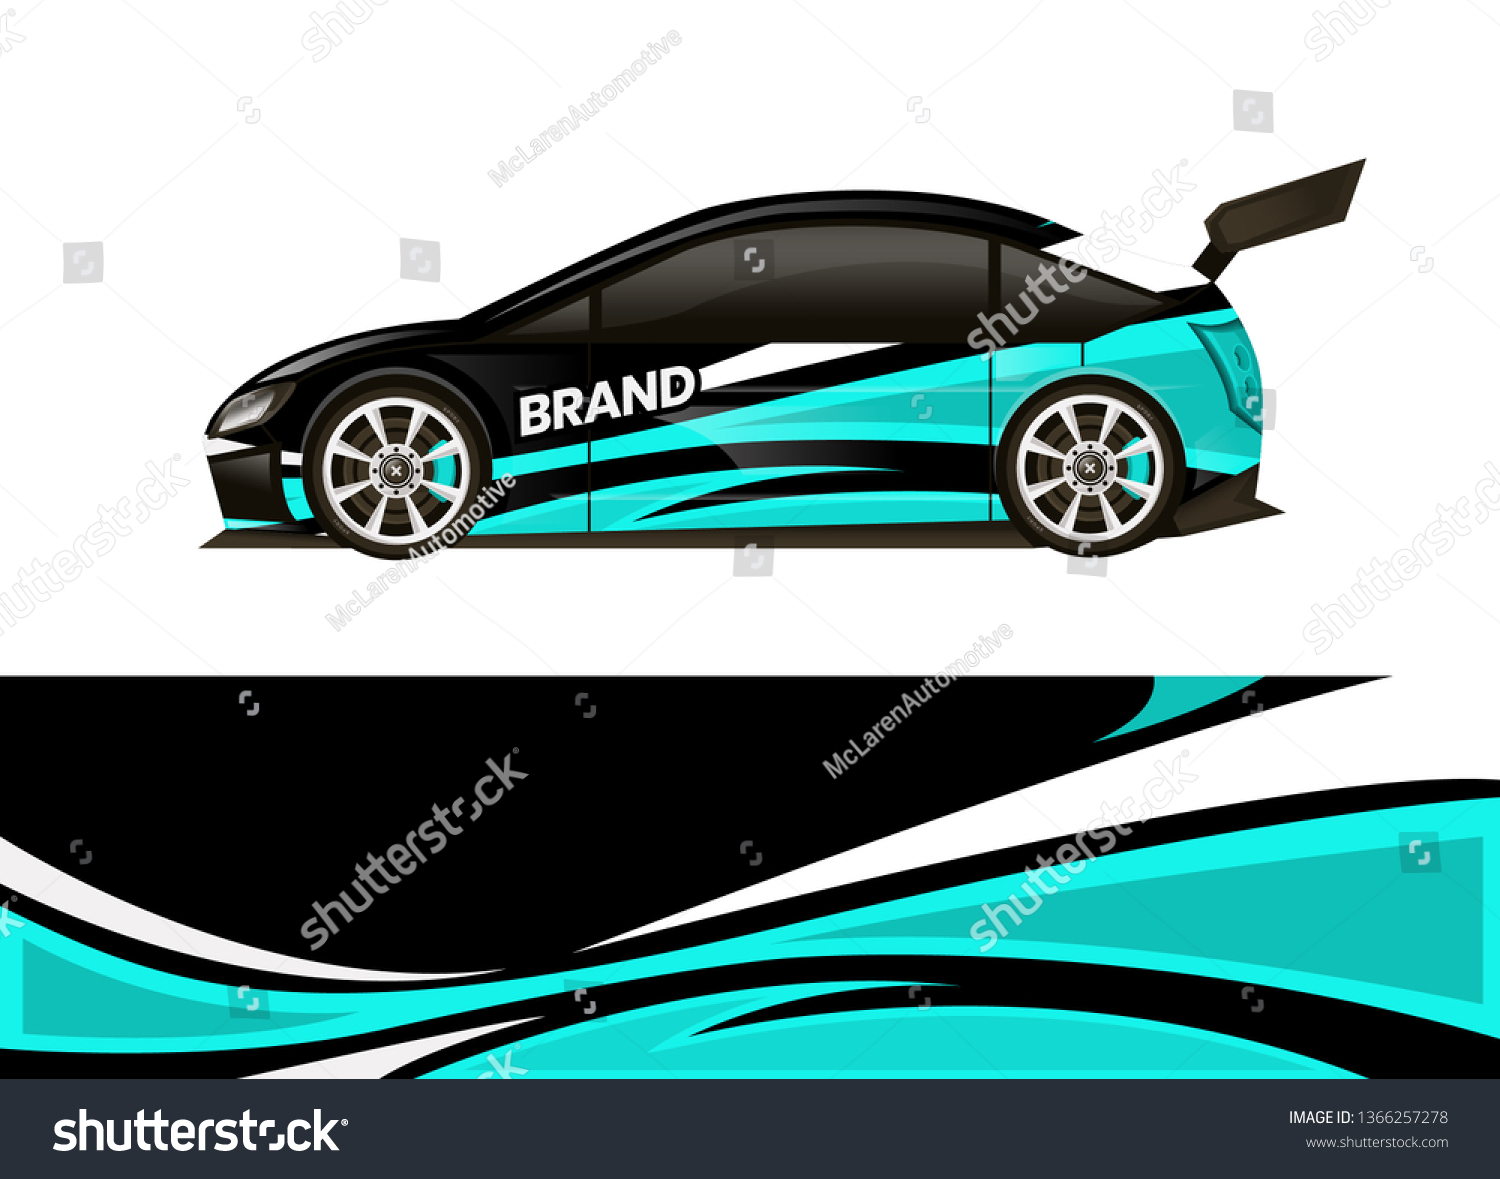 Supercars Gallery Vector Car Wrap Template,New Latest Indian Dress Designs